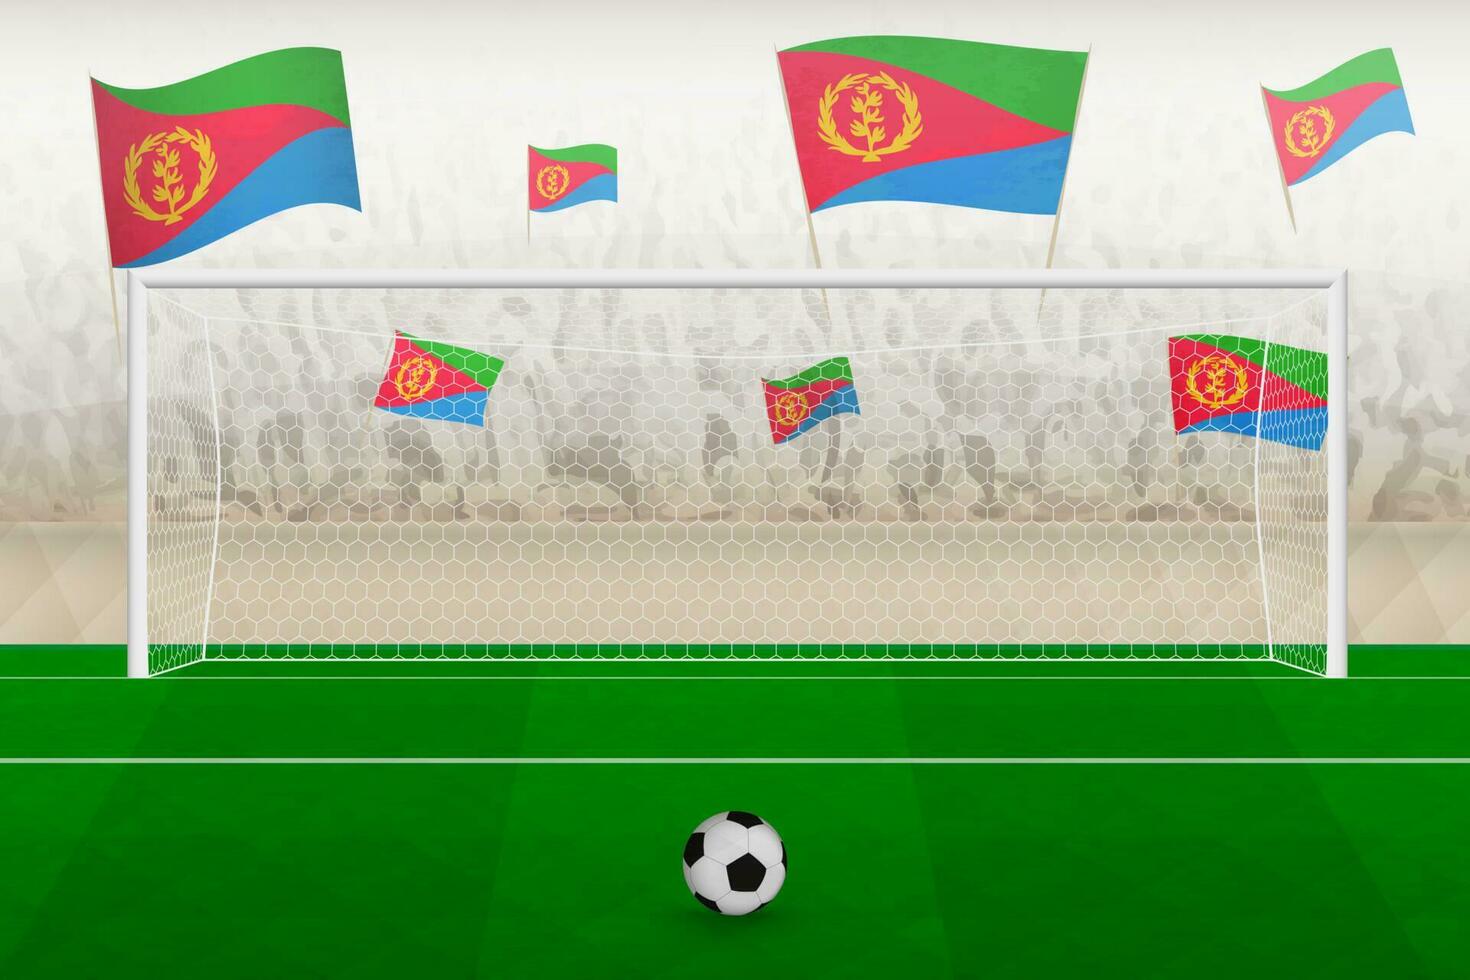 Eritrea football team fans with flags of Eritrea cheering on stadium, penalty kick concept in a soccer match. vector